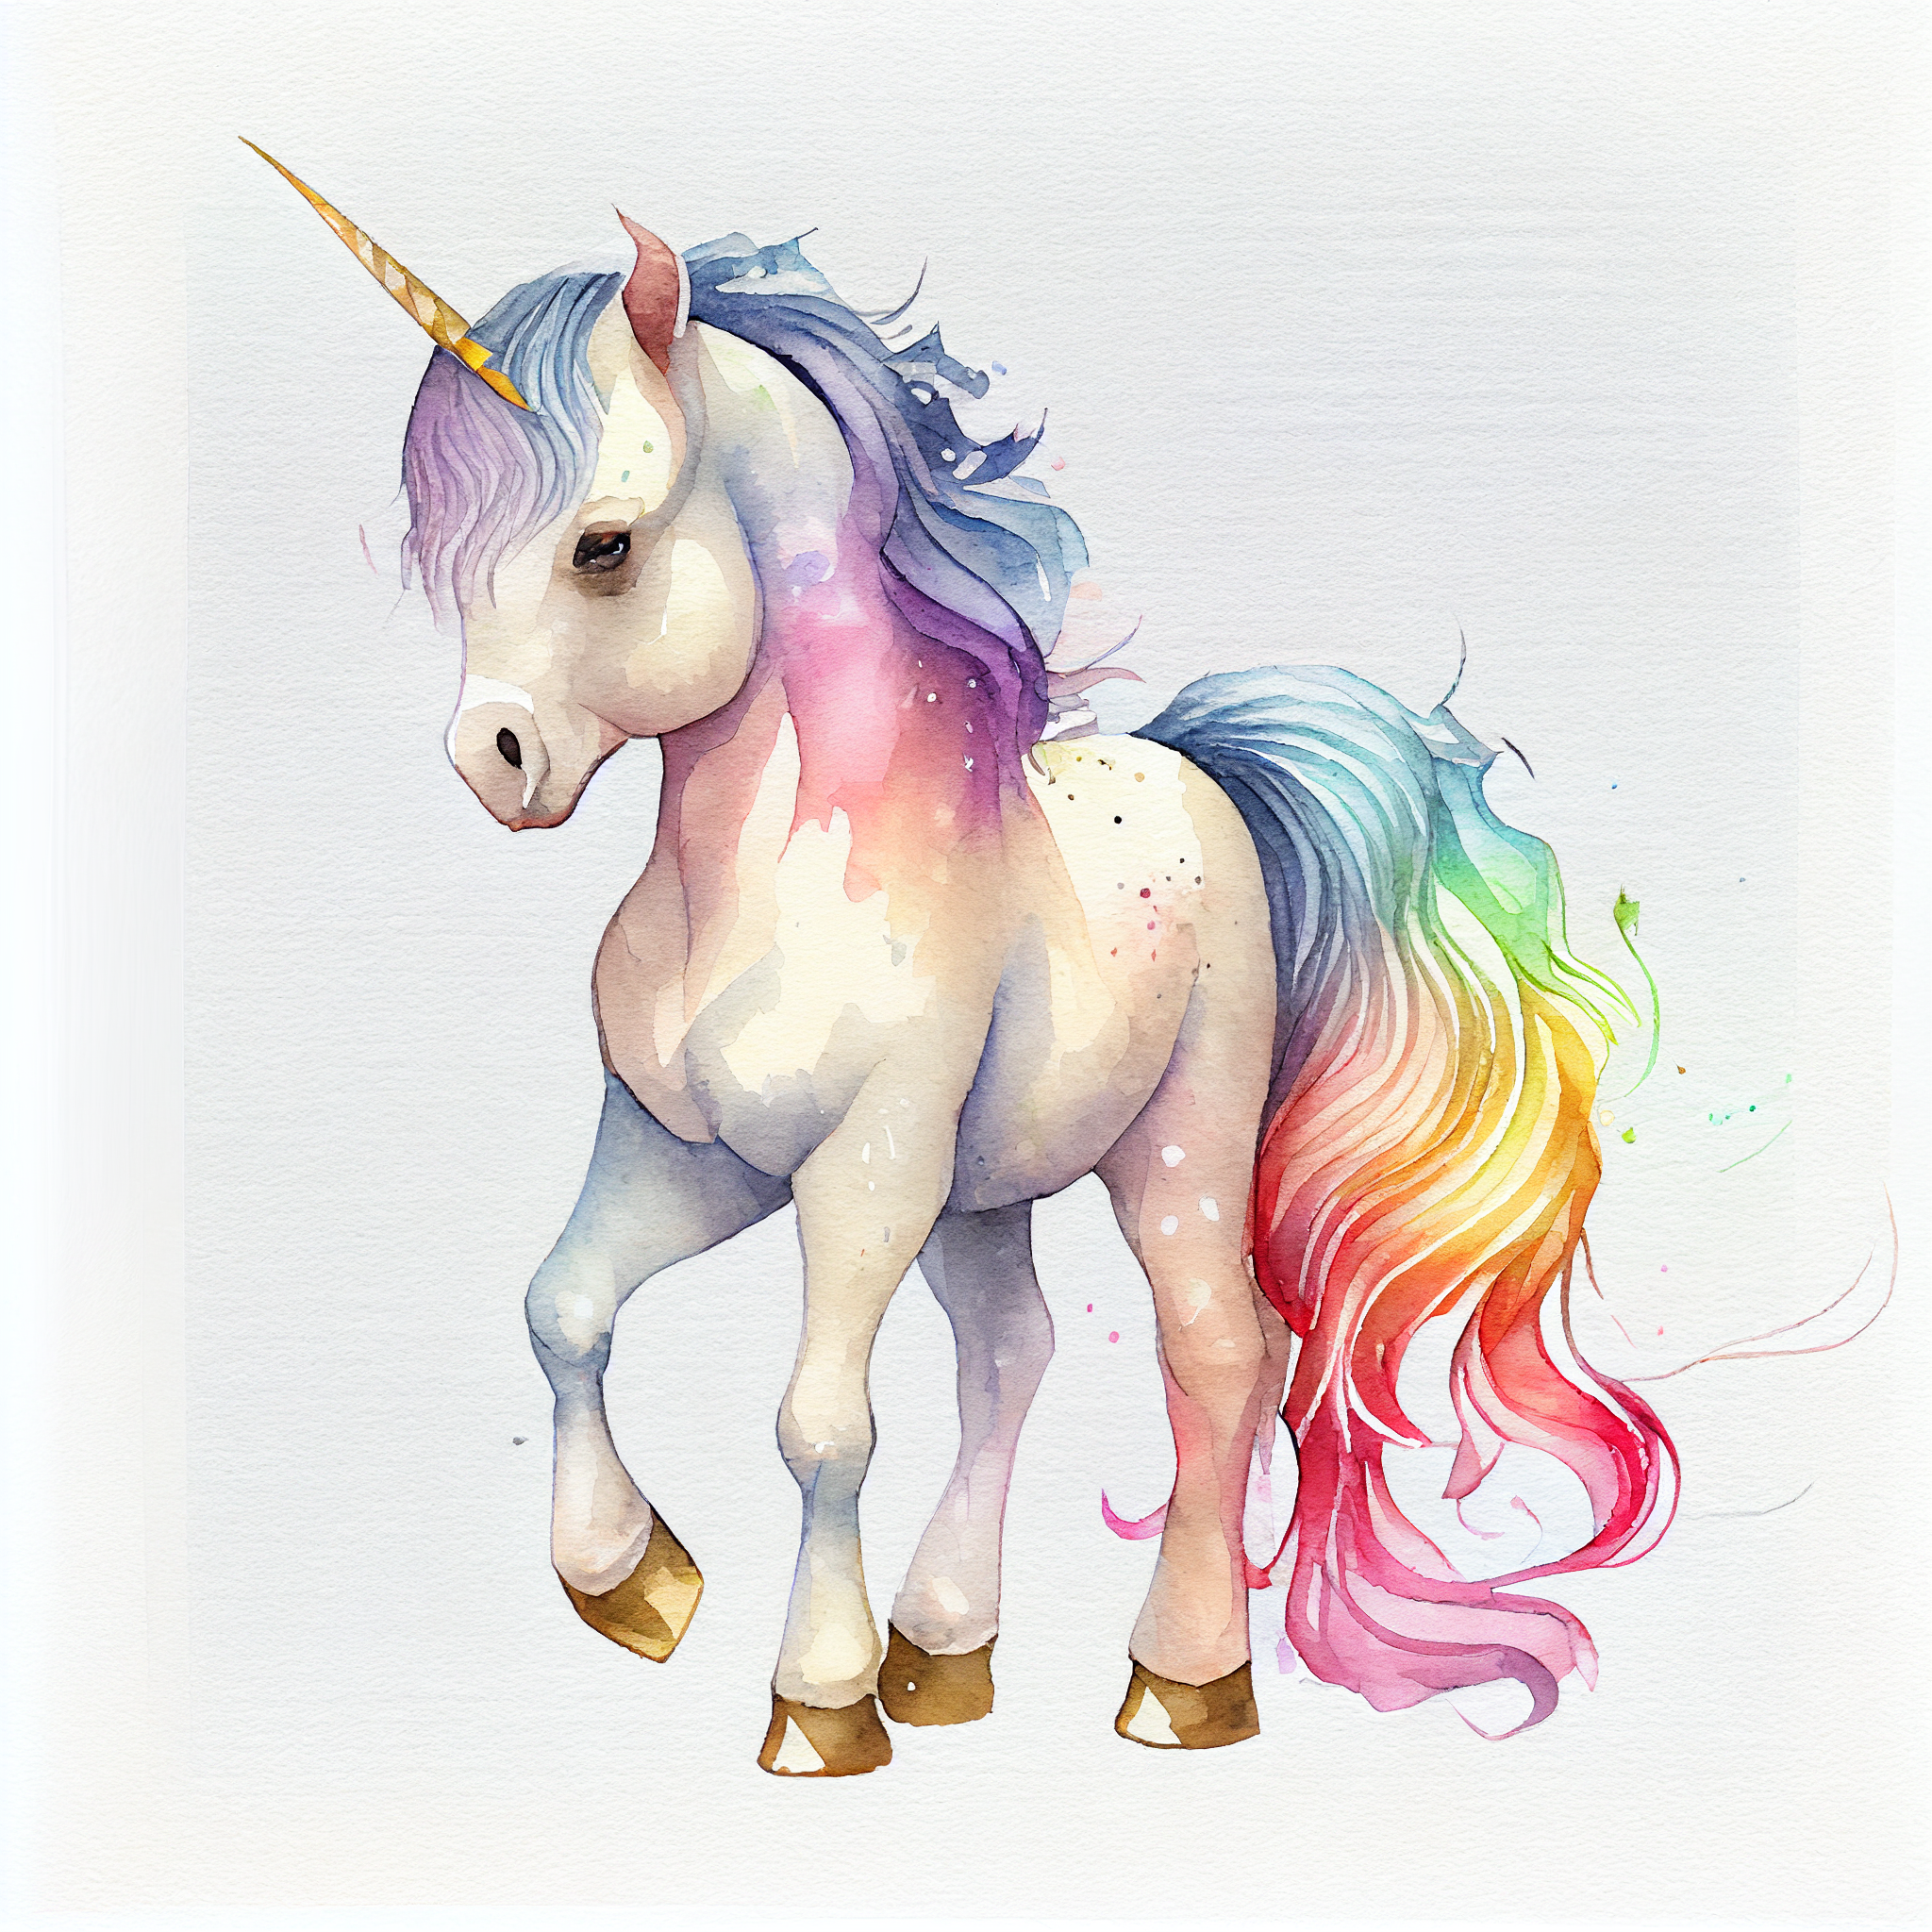 Rainbow Unicorn: A Delightful Watercolor Anime Image of a Baby Unicorn with a Vibrant Rainbow in the Background, Perfect for Kids and Nursery Wall Decor